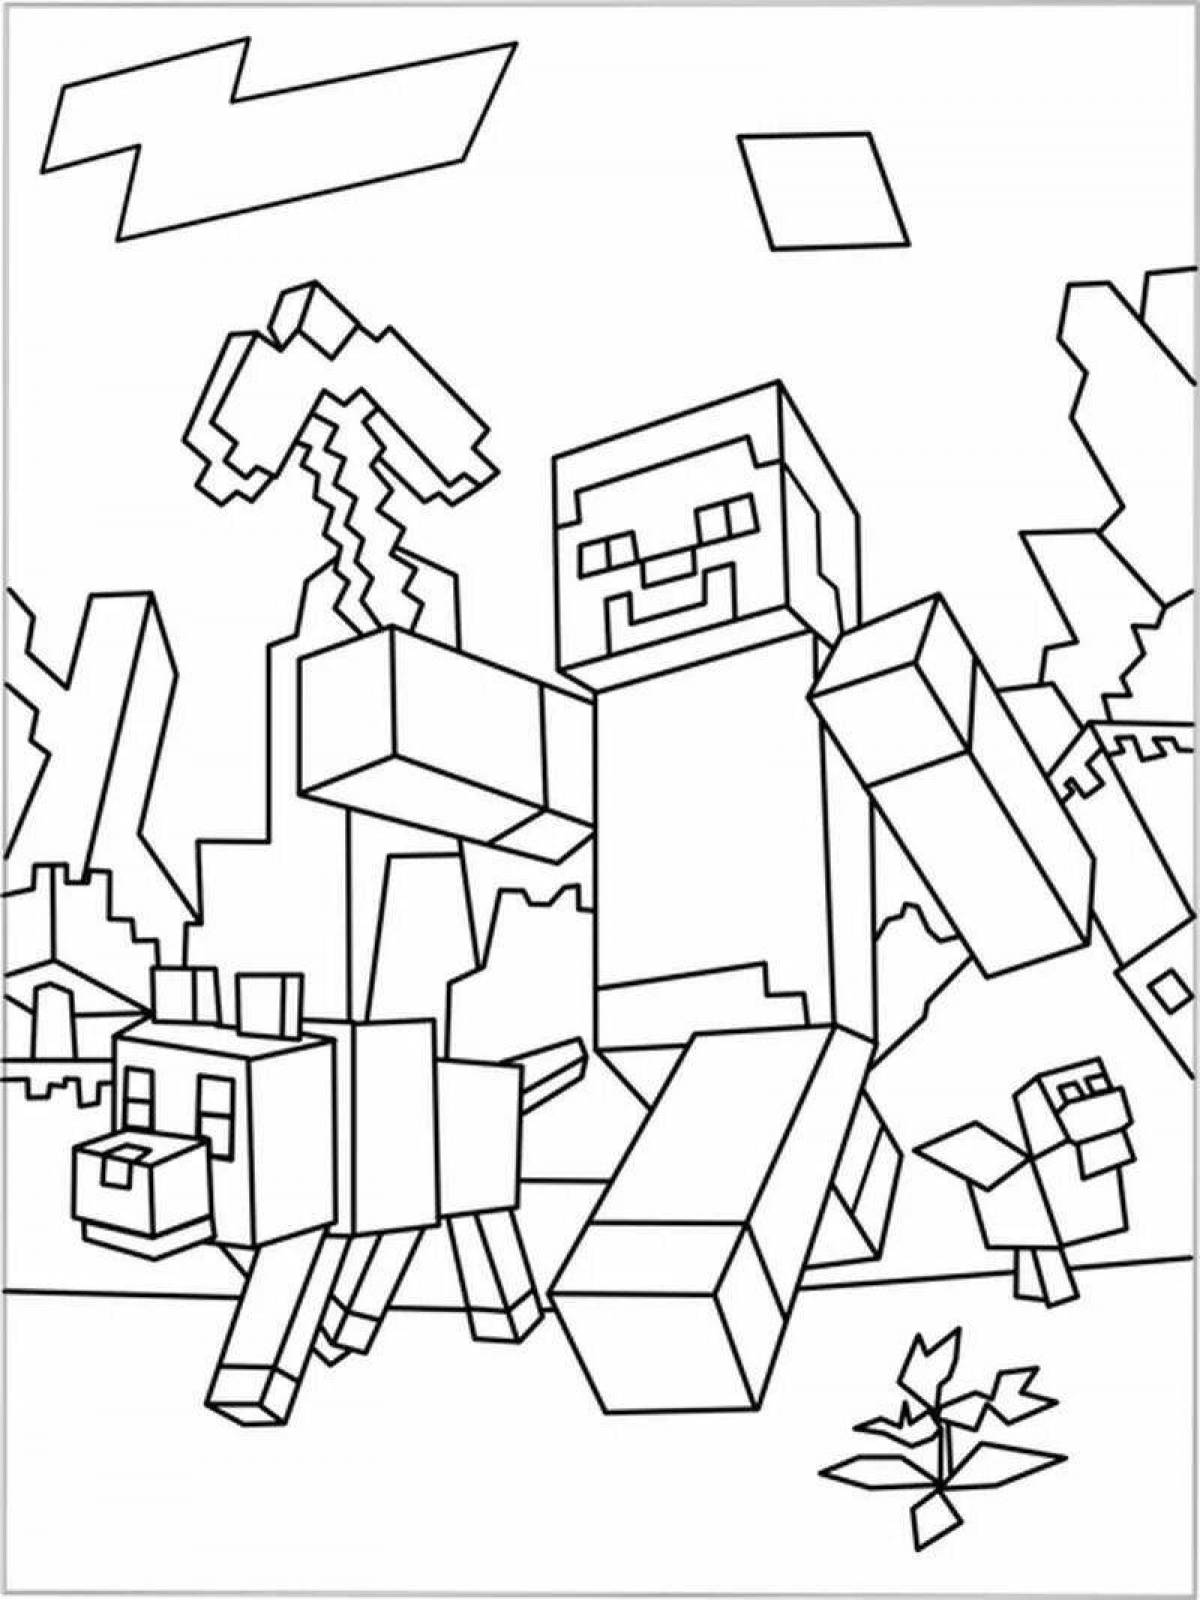 Minecraft colorful coloring book for 9 year old boys